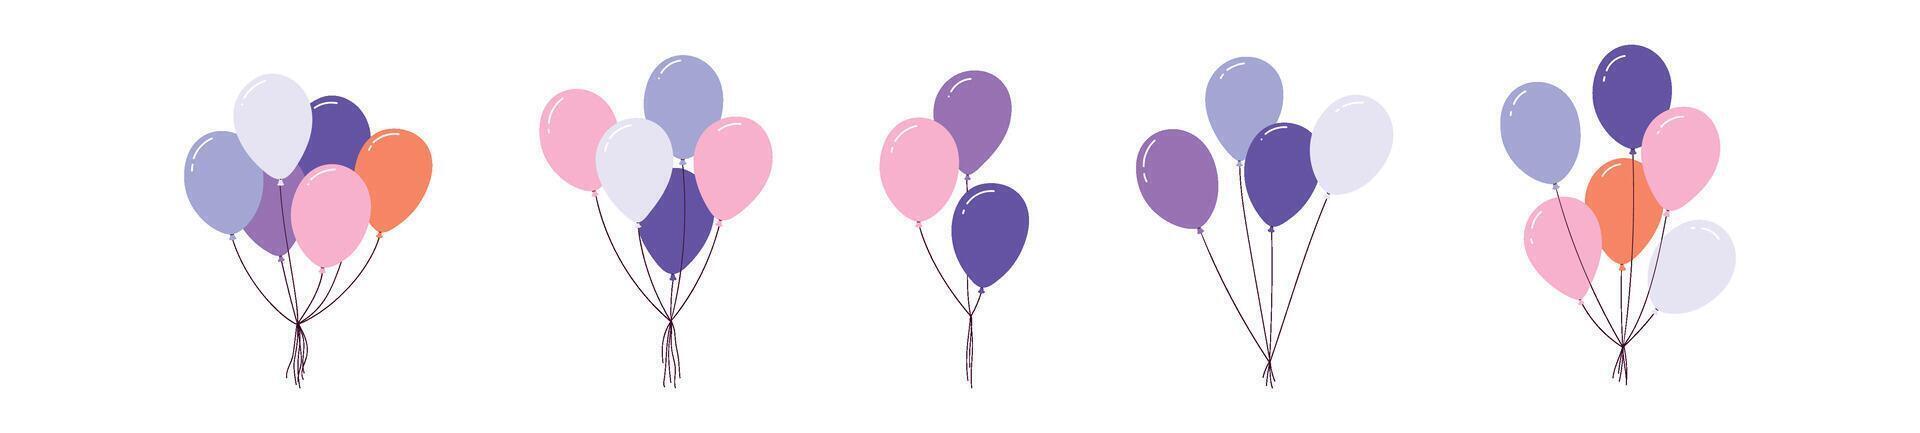 Bunch of balloons in cartoon style for birthday and party. Colorful balloons with flat ropes, festive bundle. Flat vector illustration isolated on white background.